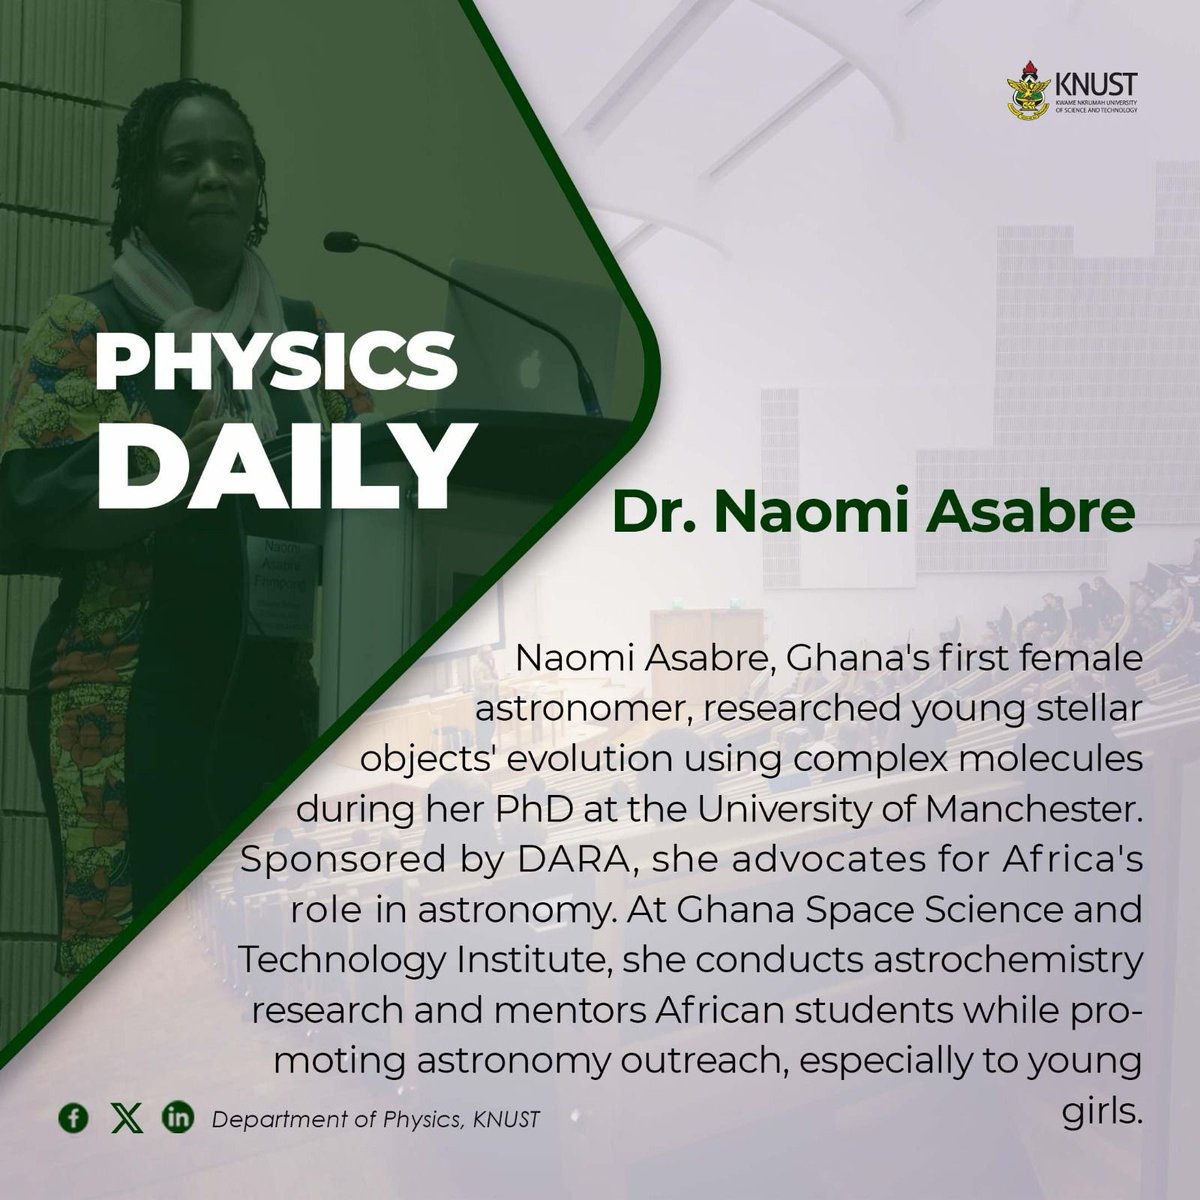 Breaking barriers and reaching for the stars ✨, meet the first Ghanaian female astronomer! #physicsdaily #WiSTEM #physicsknust #knust